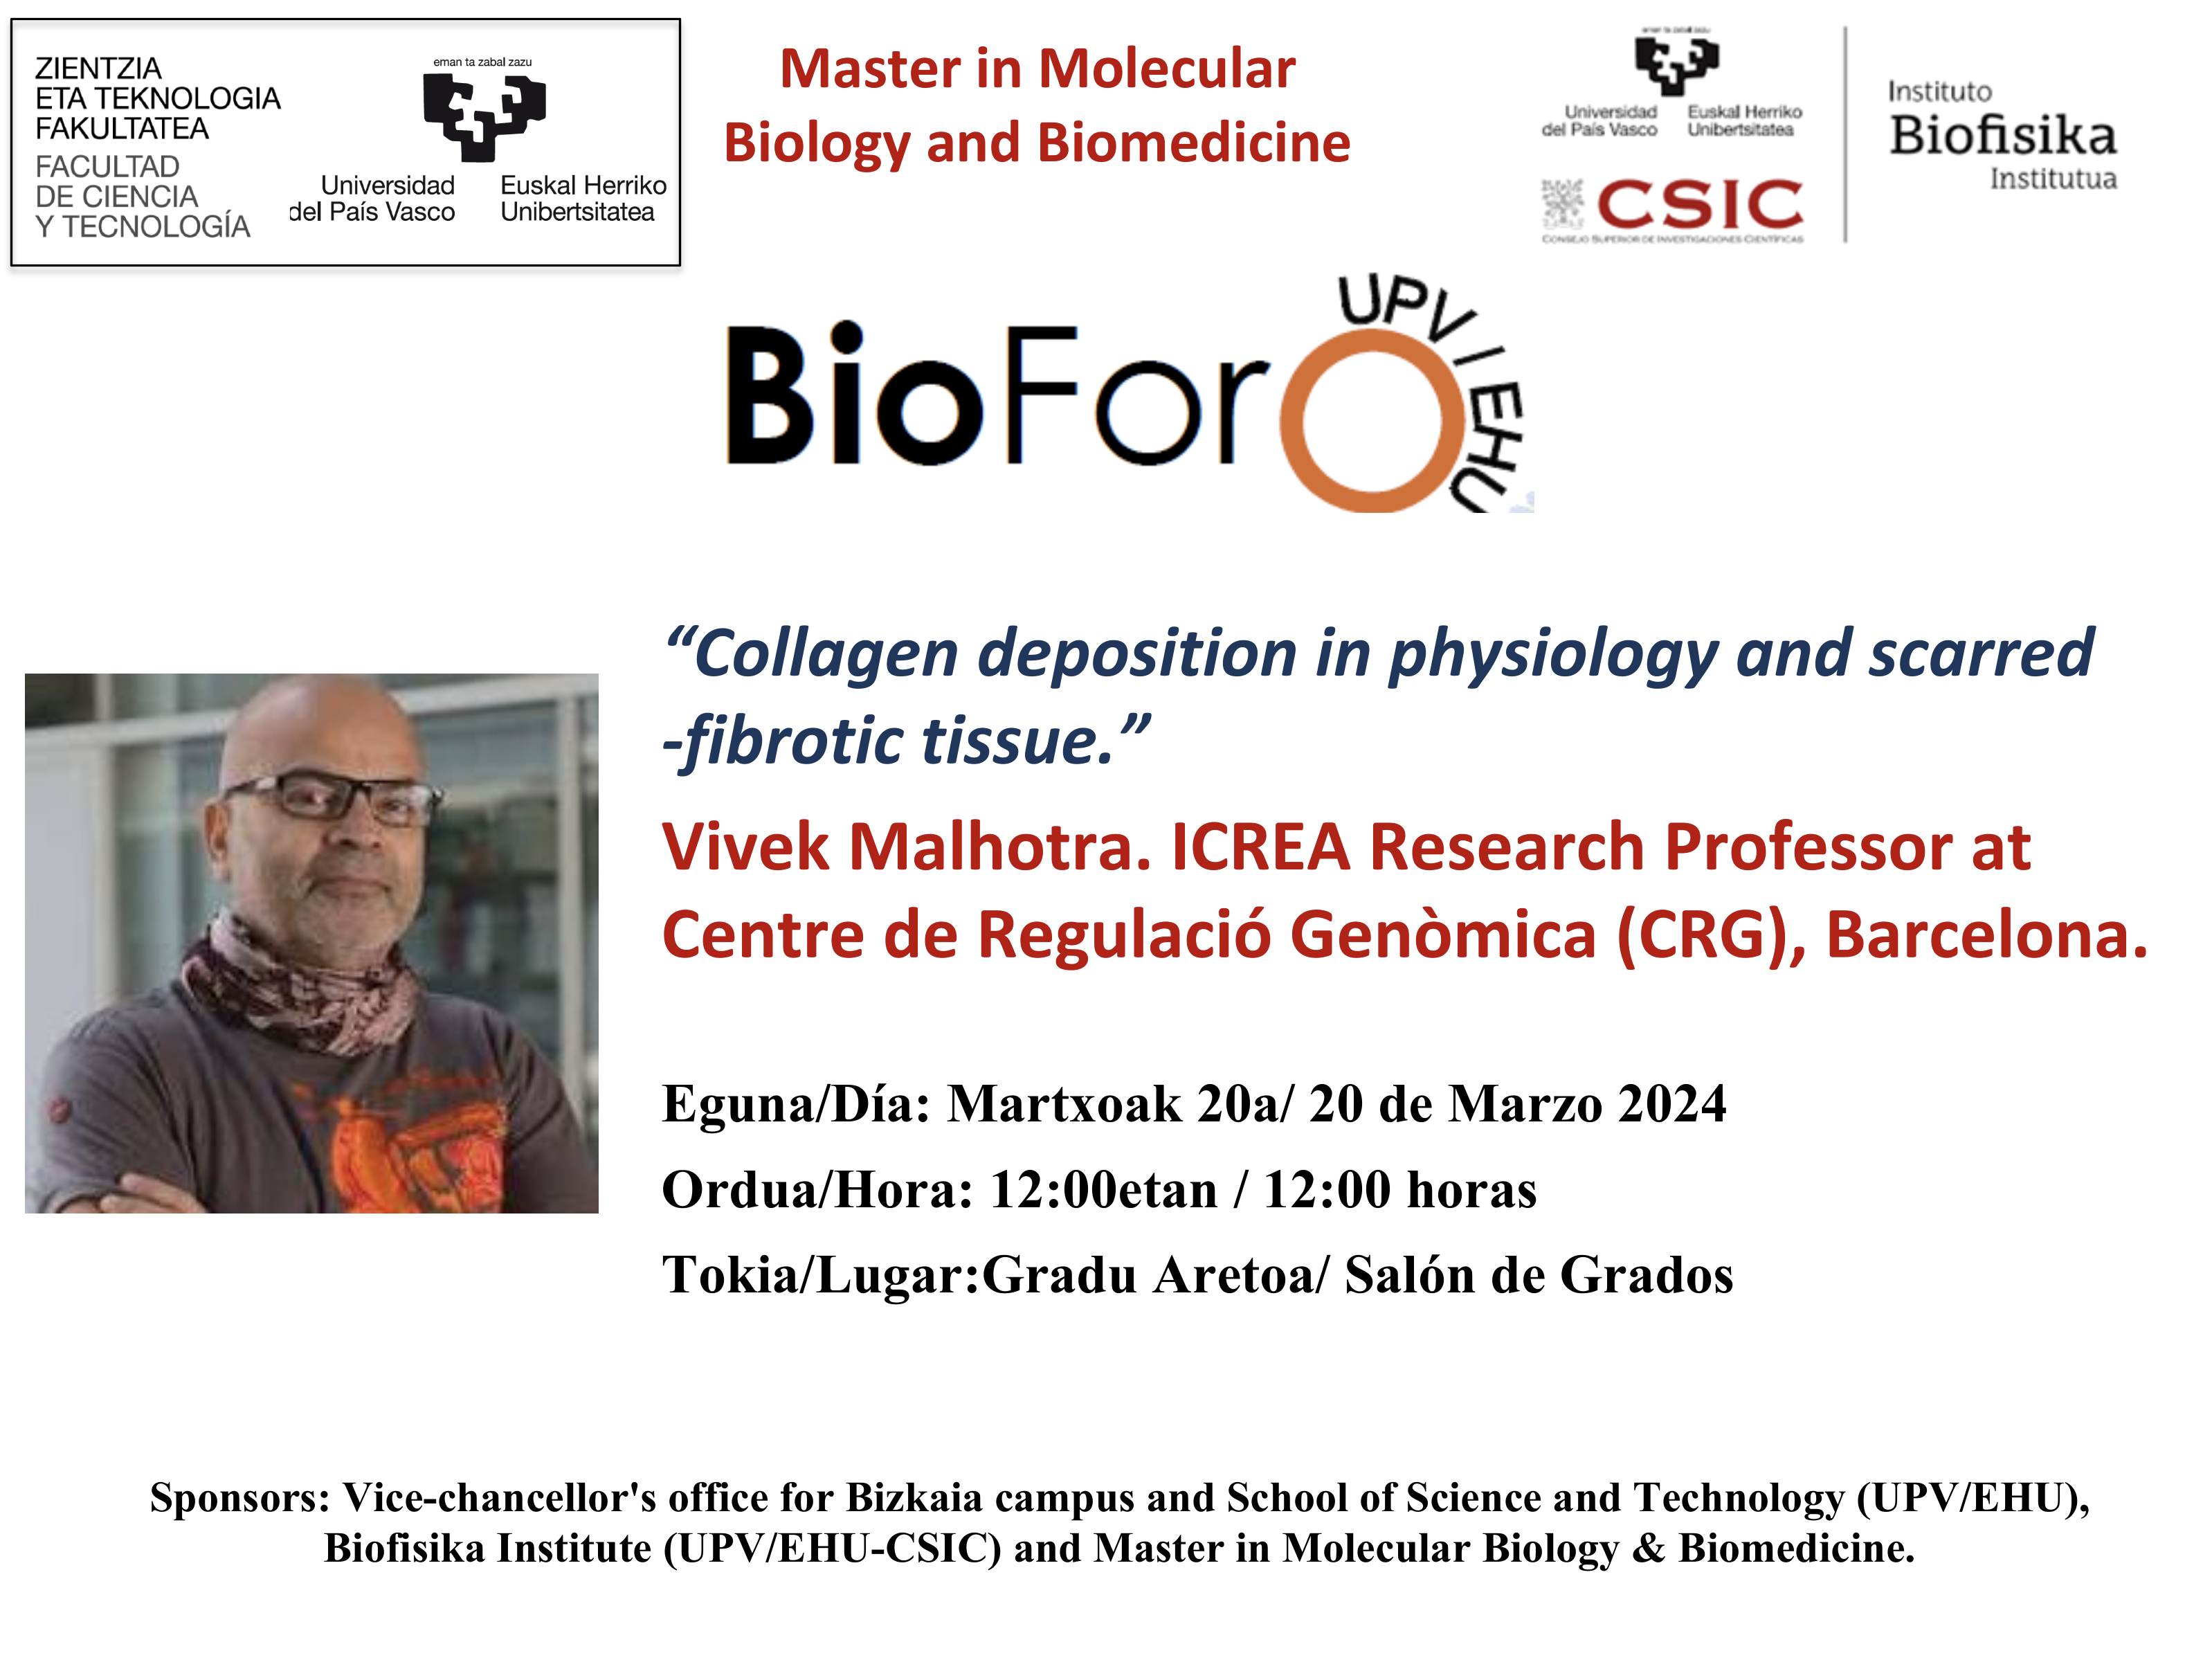 BioForo Seminar: "Collagen deposition in physiology and scarred-fibrotic tissue"